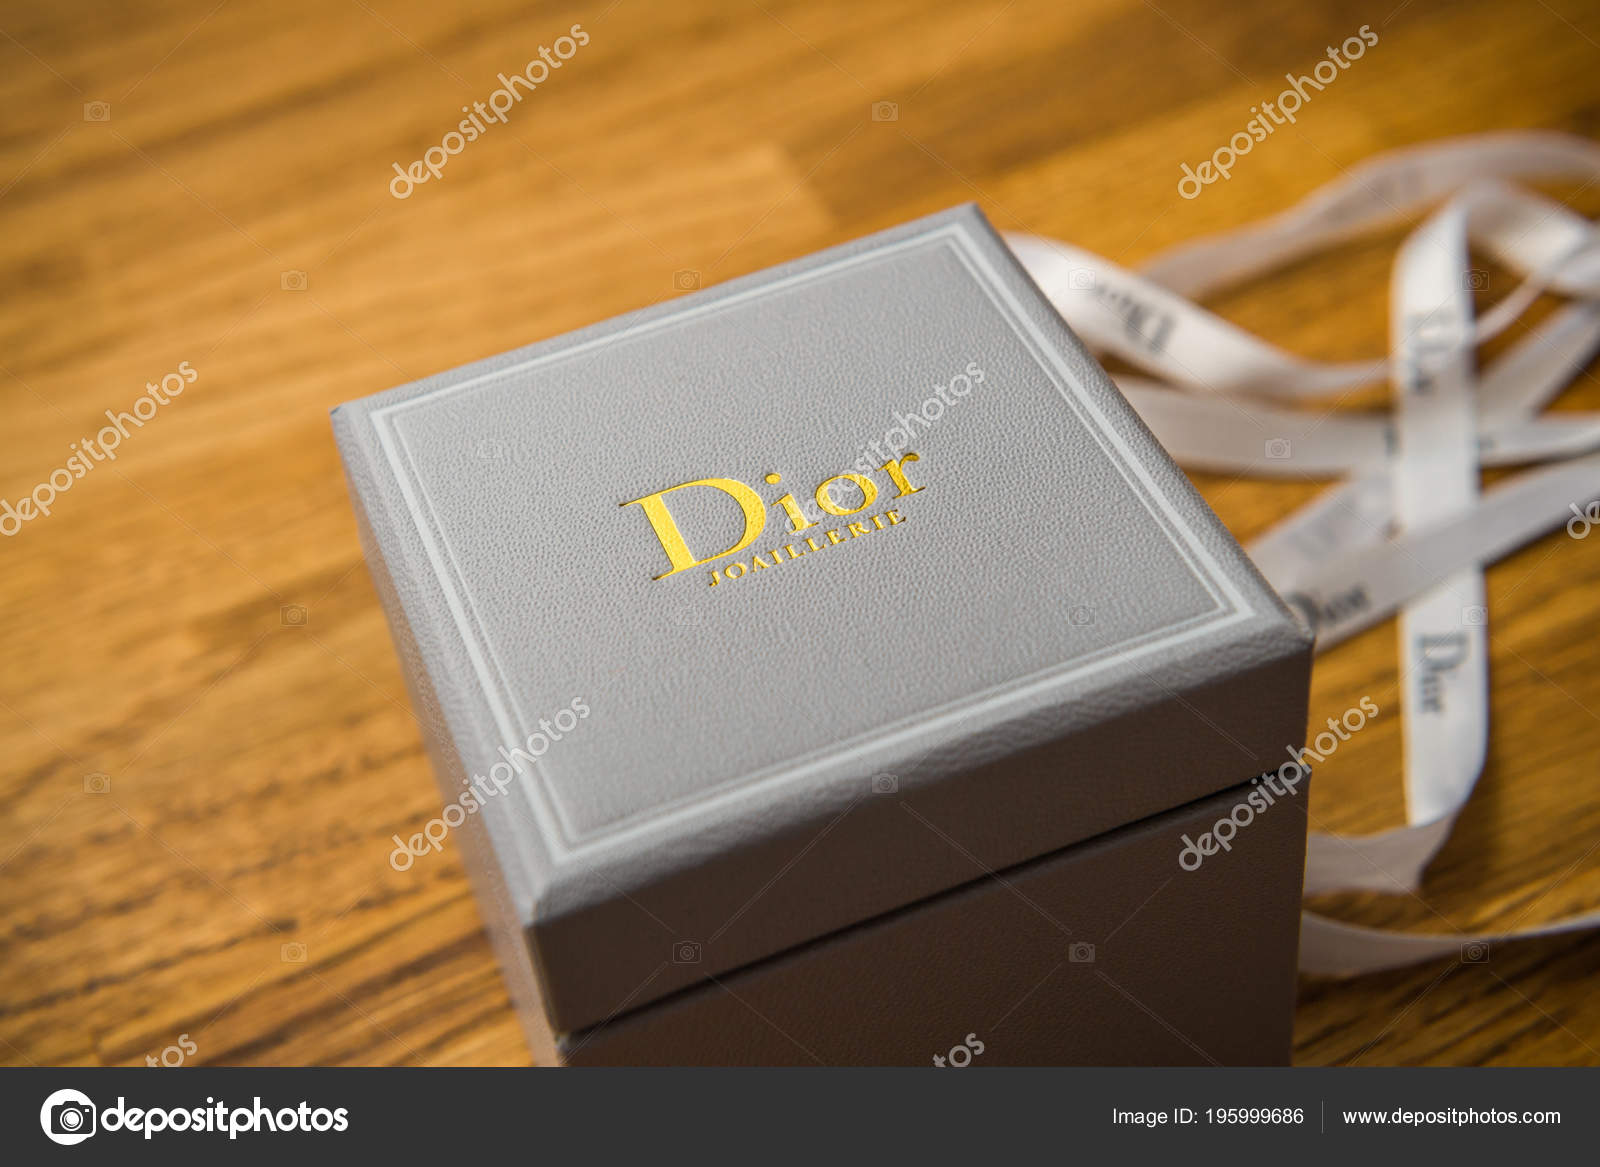 Christian Dior jewelry box after unboxing on table – Stock Editorial Photo  © ifeelstock #195999686